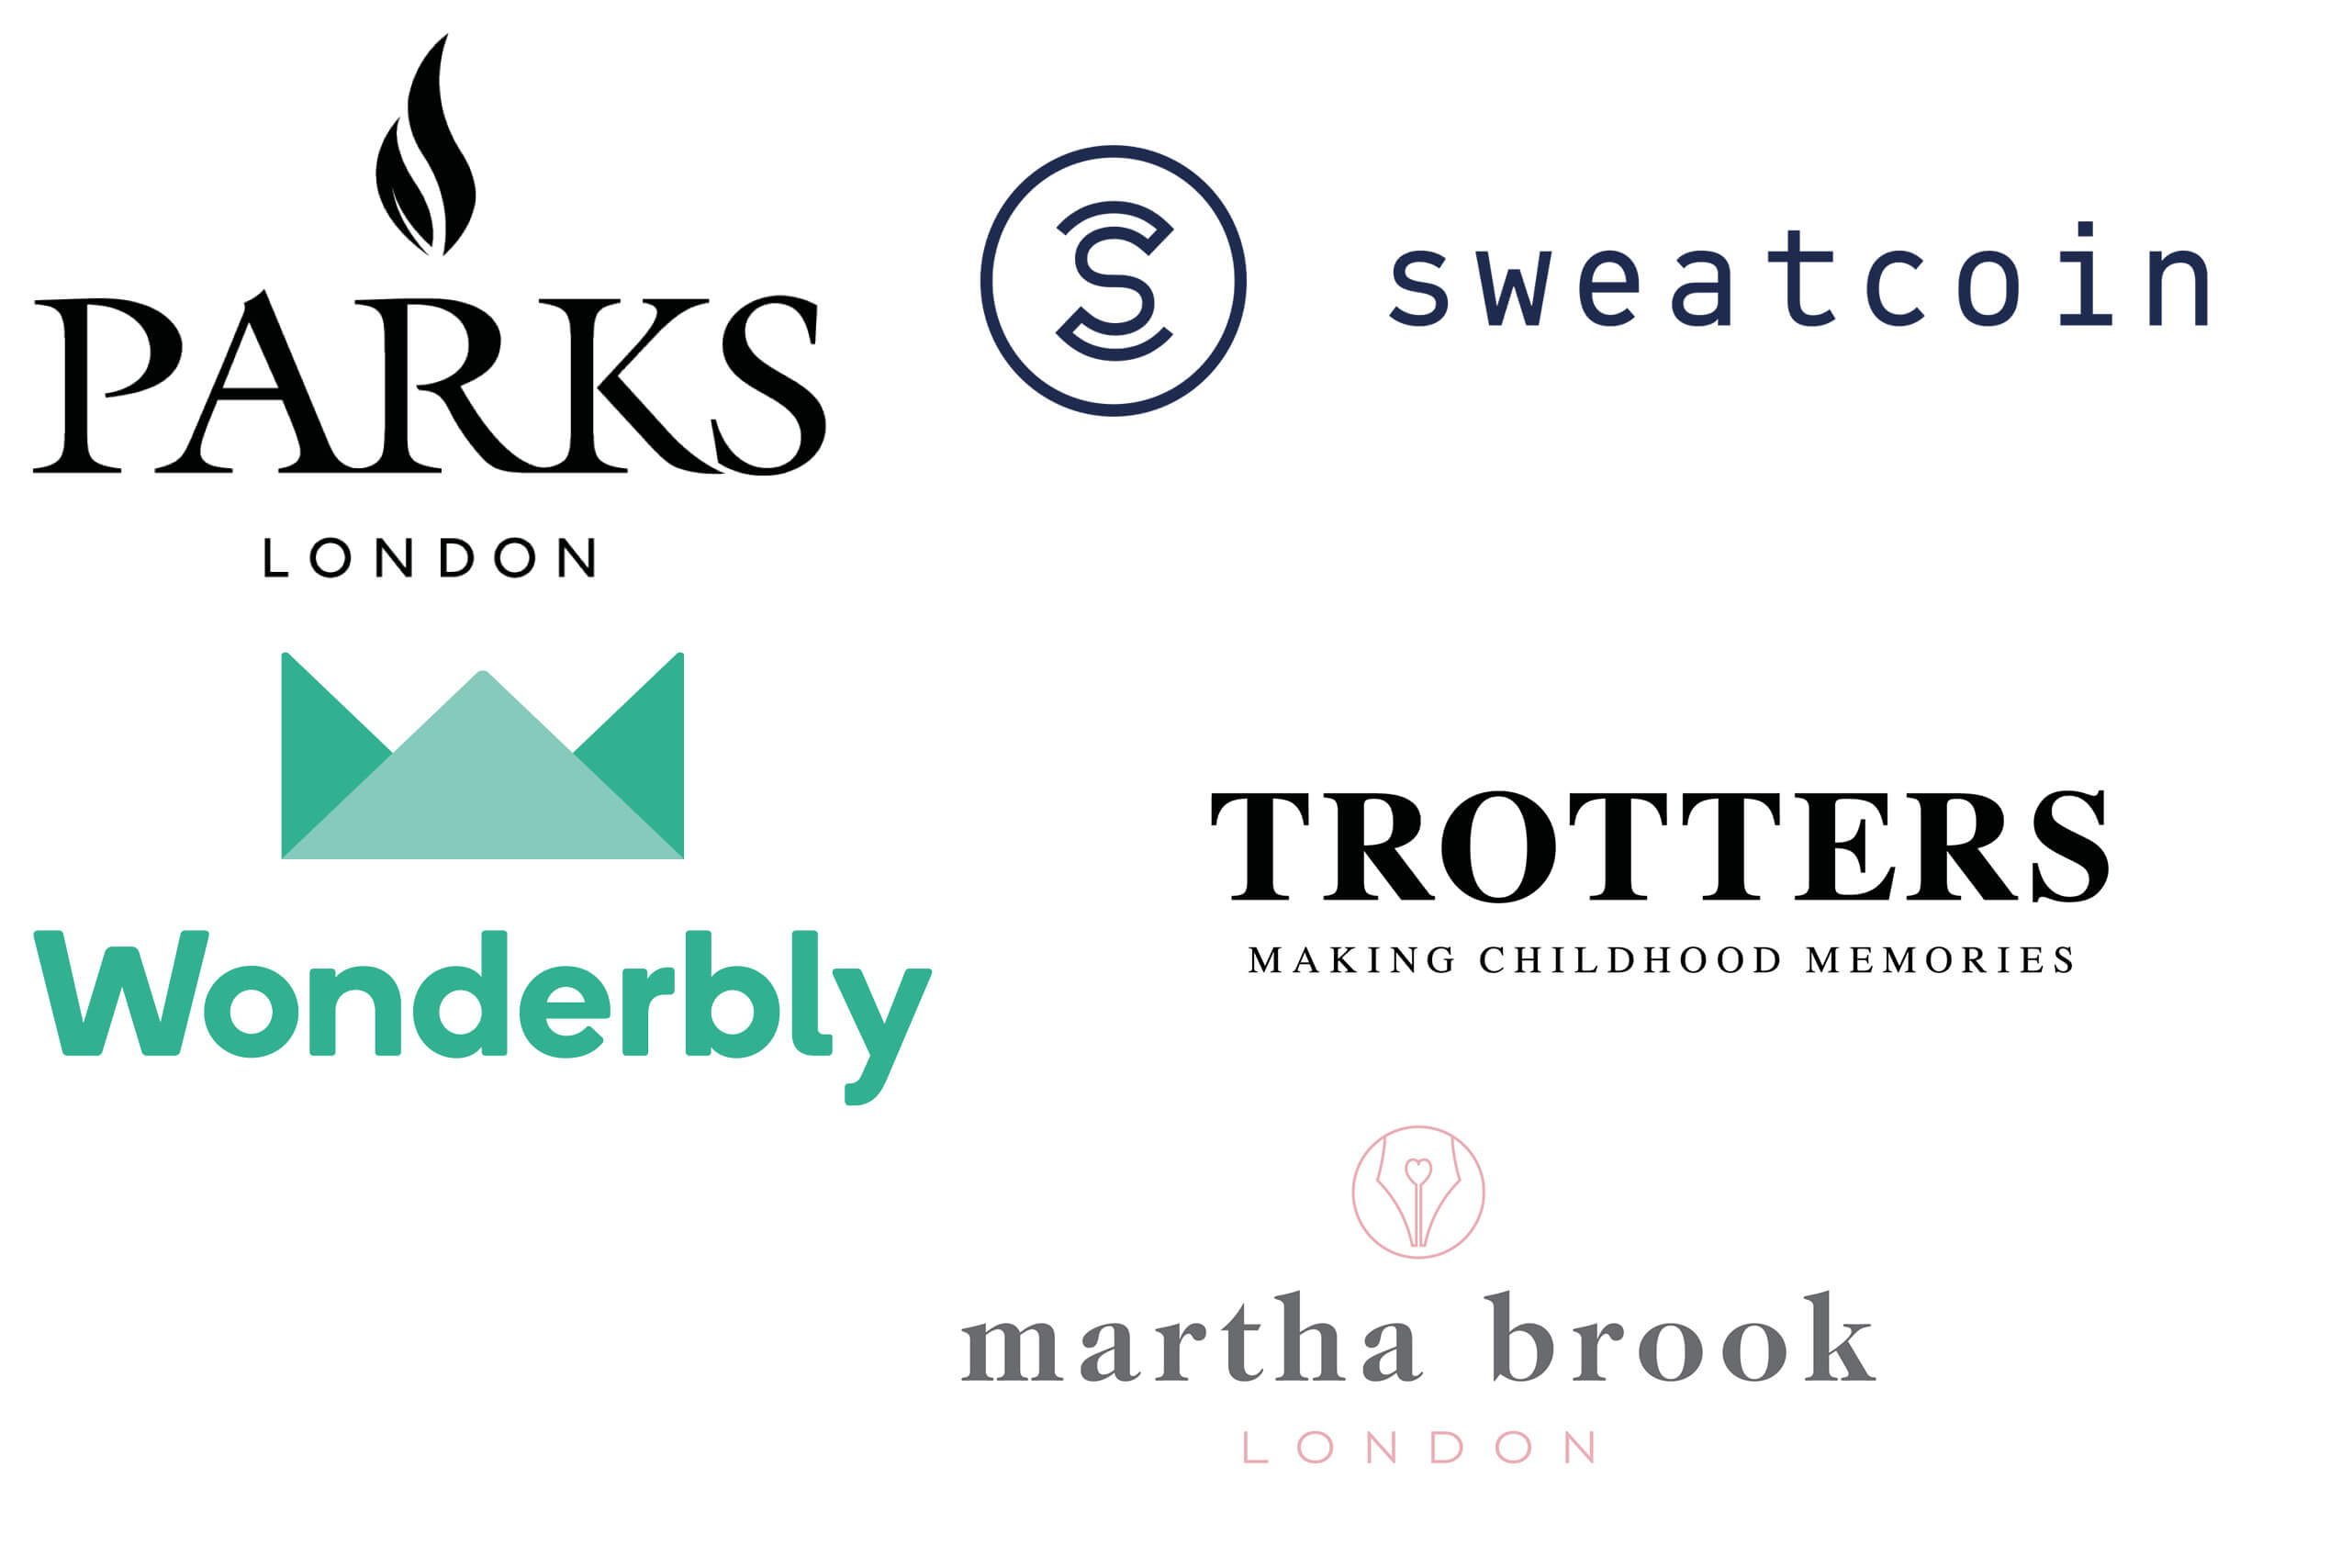 Christmas Jumper Day partner logos for Martha Brook, Parks London, Sweatcoin, Trotters and Wonderbly